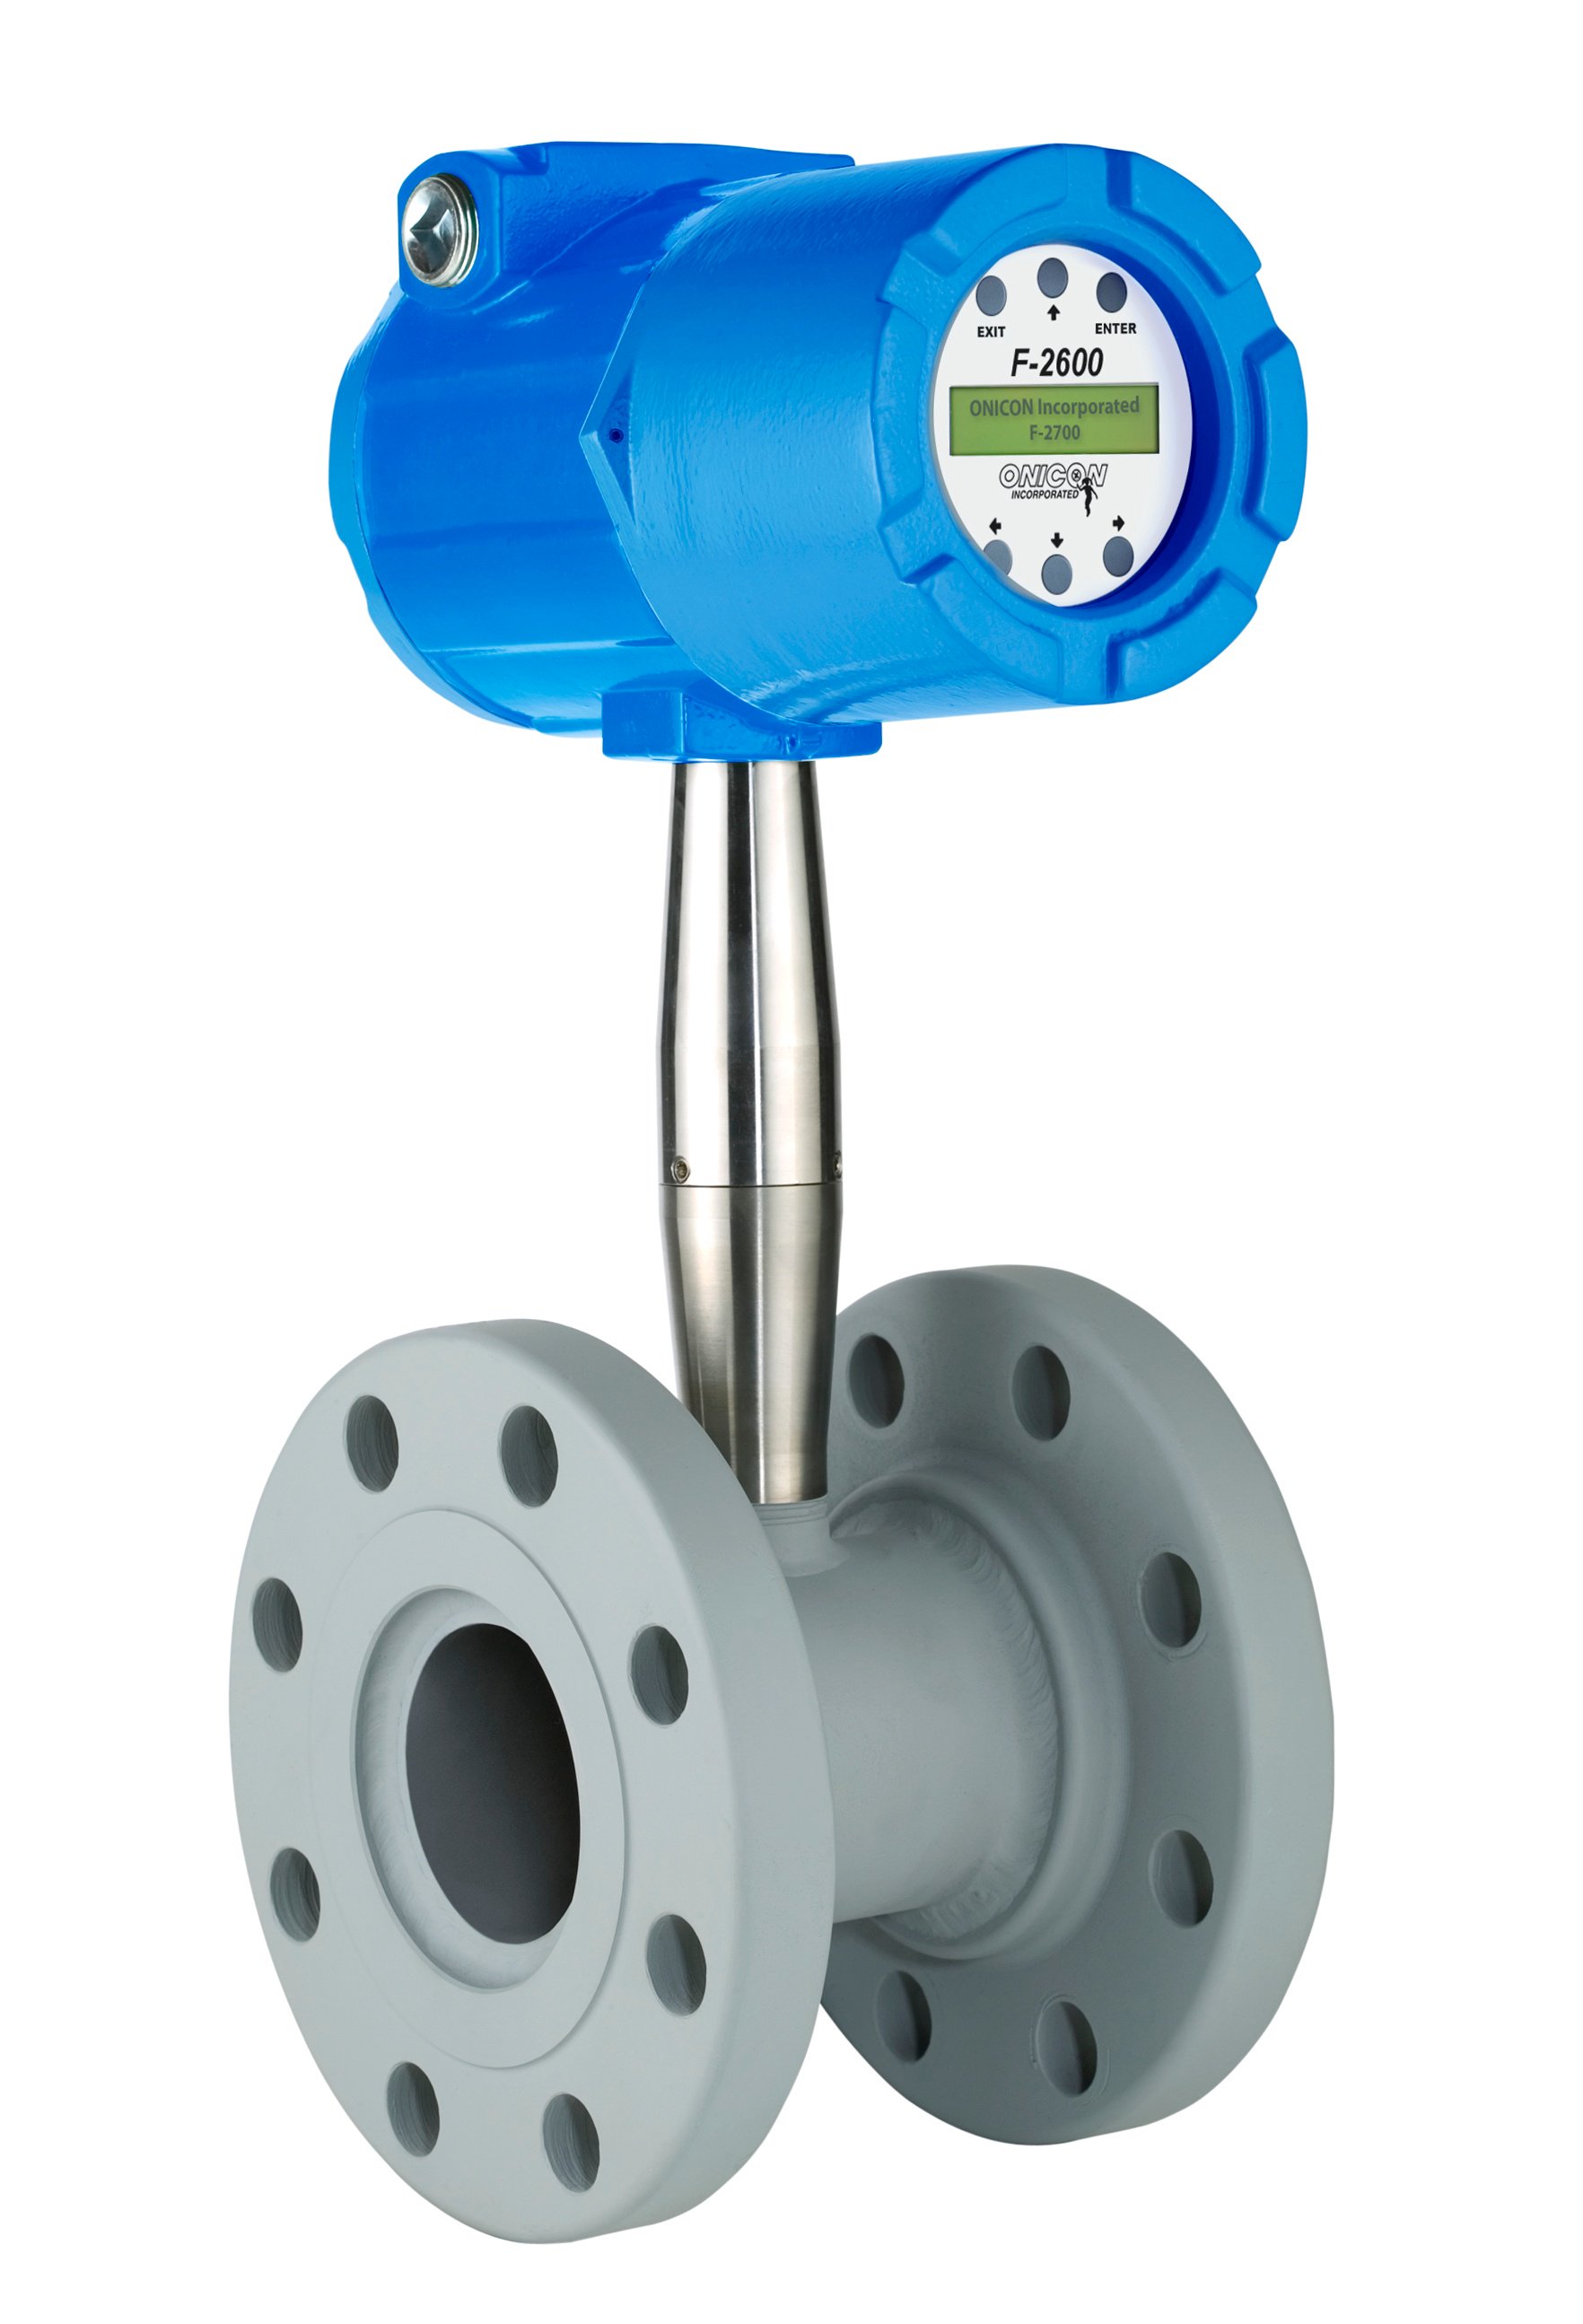 Vortex Flow Meters from Smith and Wilson Baltimore